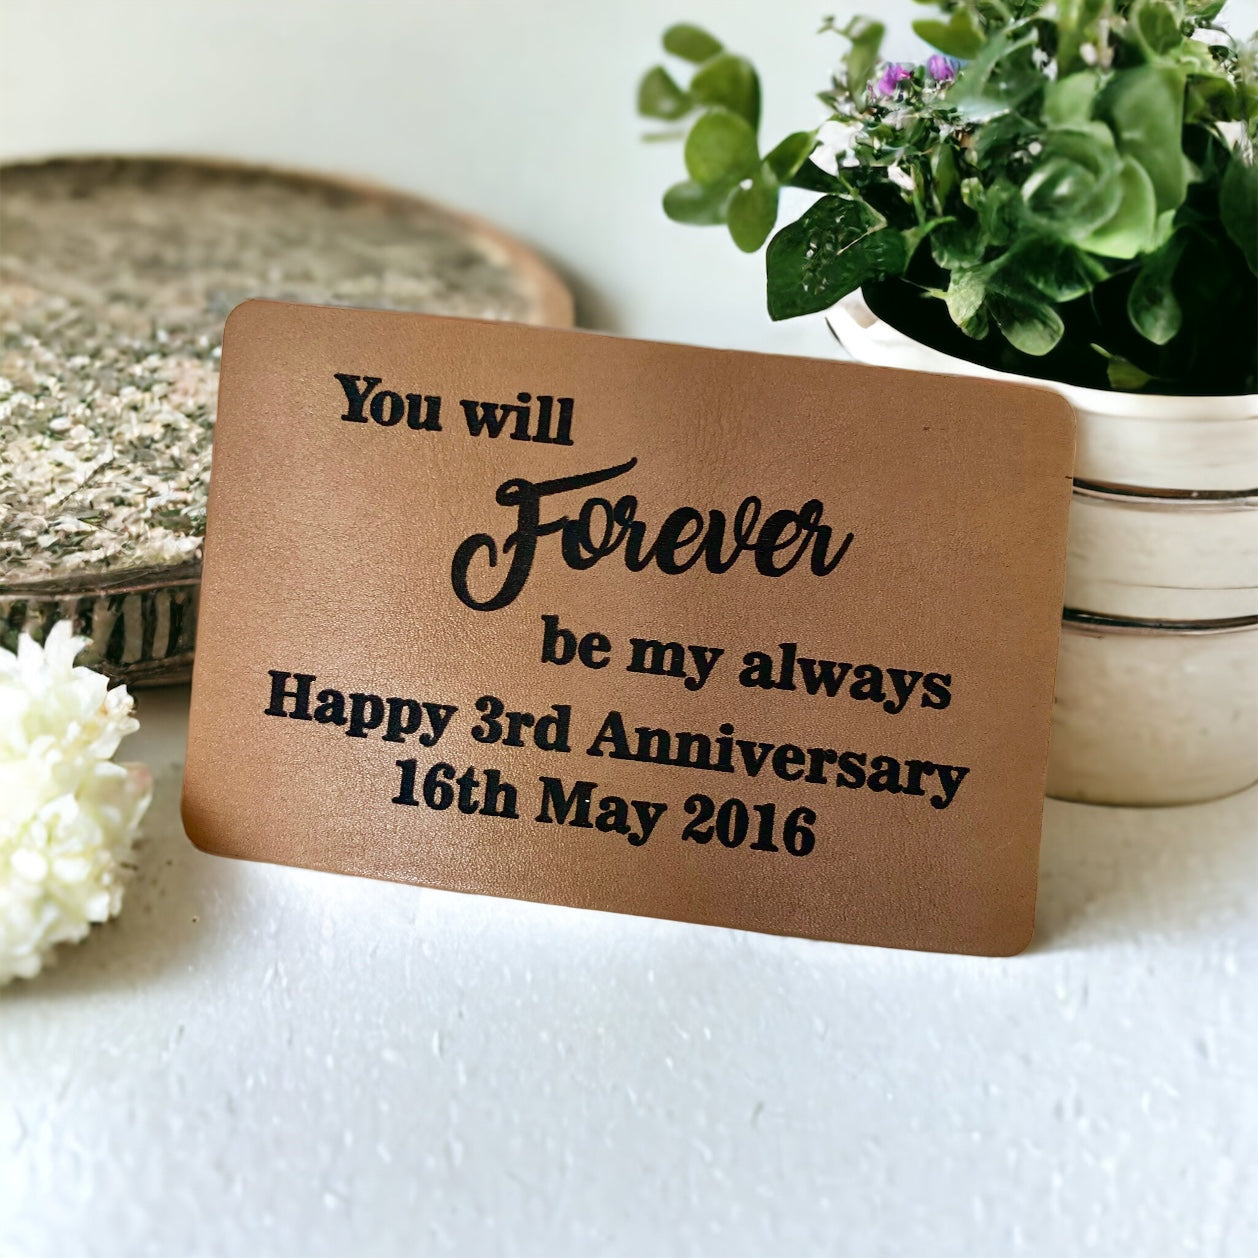 Personalised Leather Wallet Card Insert - You will Forever be my always - 3rd Leather Anniversary